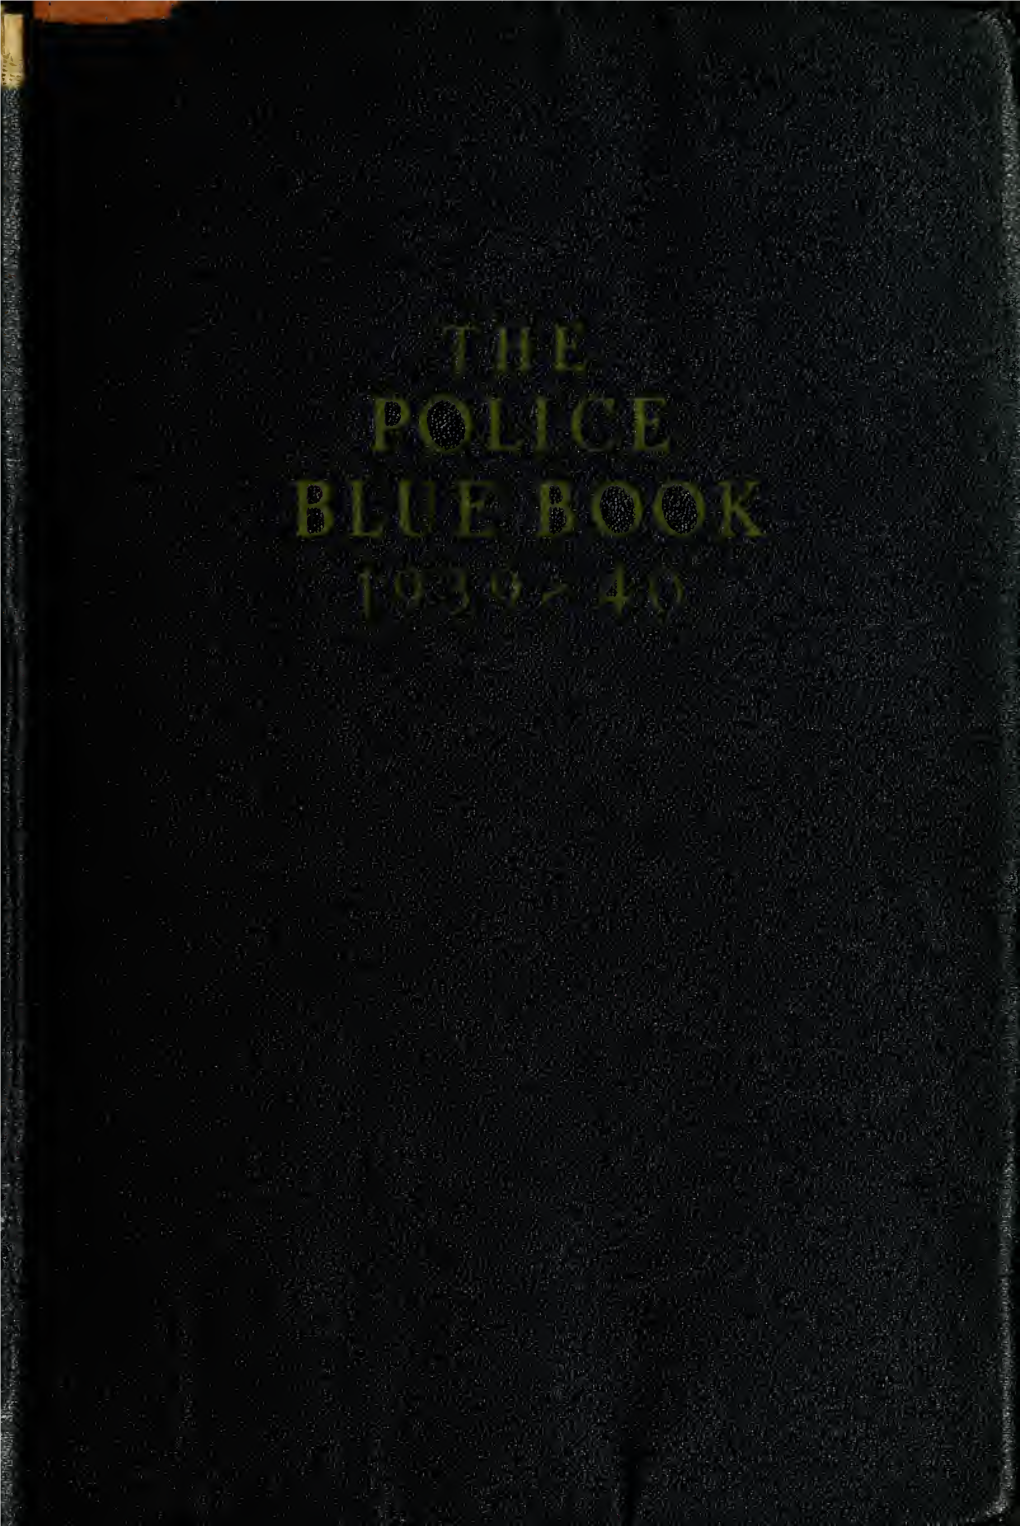 The Police Blue Book